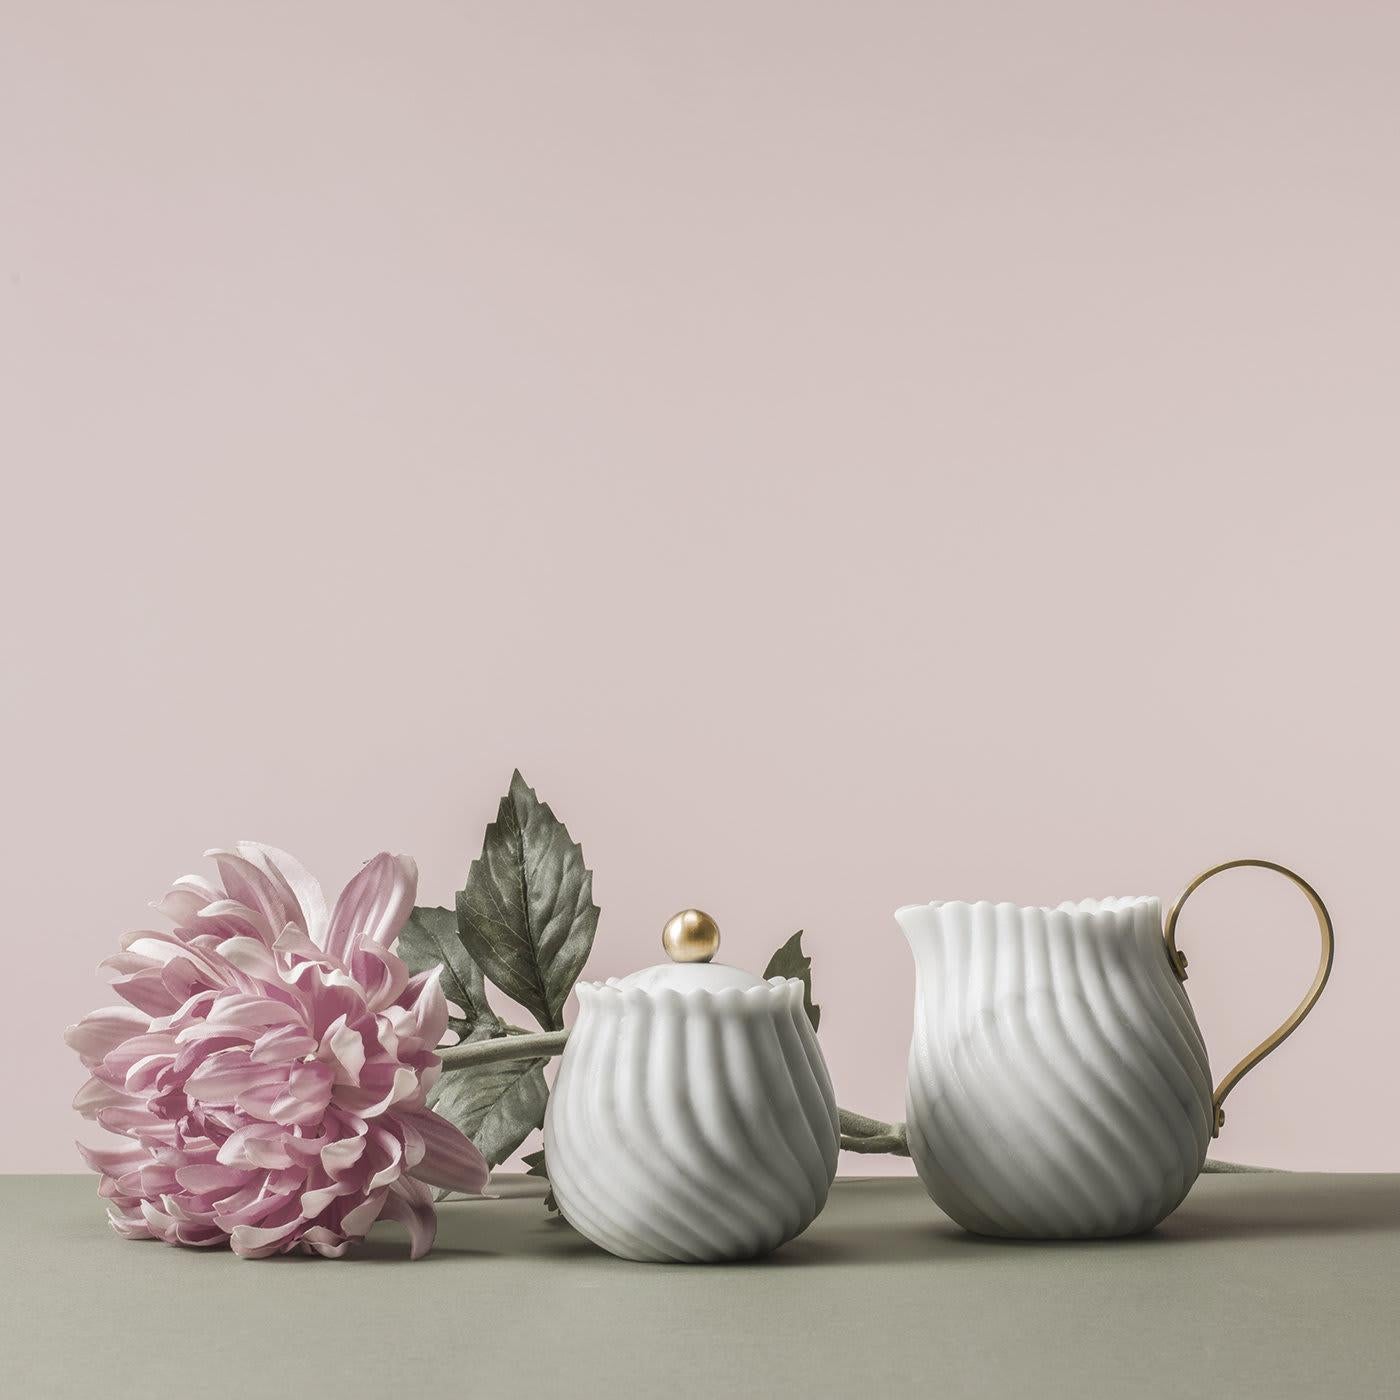 The Victoria Collection celebrates the tea ritual by merging the British afternoon tradition with a classic Italian and noble material: marble. This superb sugar bowl, part of the set, features a sinuous, hand-carved relief pattern that creates